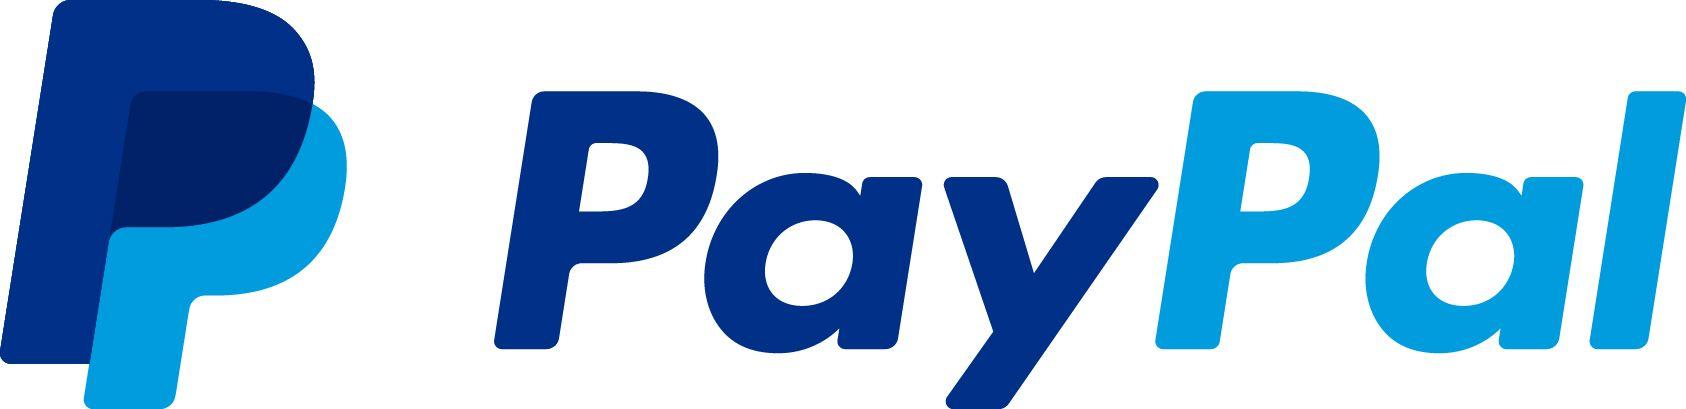 PayPal 2017 Logo - Media Resources - PayPal Stories